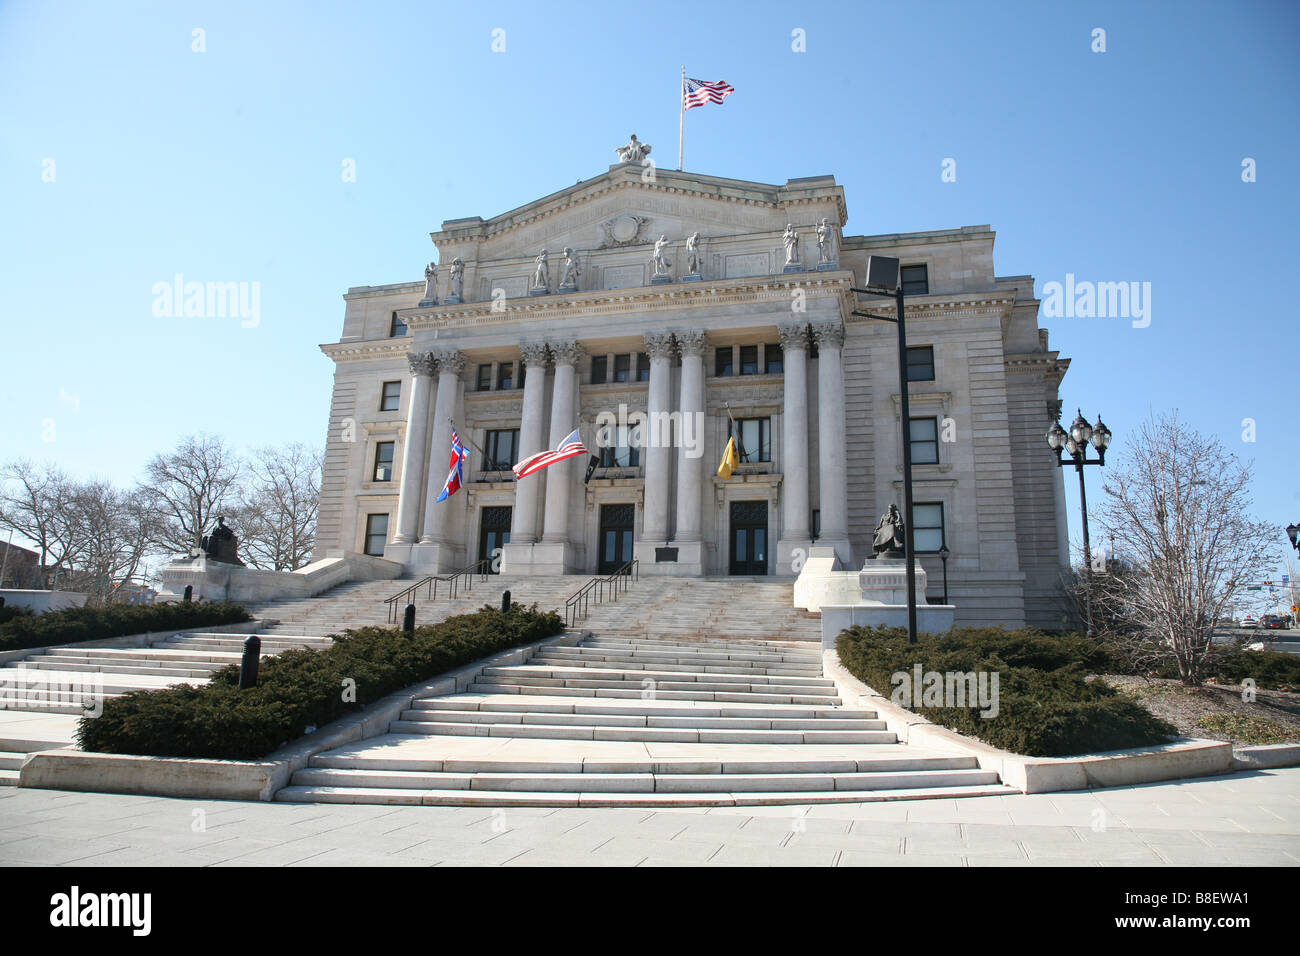 Essex County Courthouse situato in Newark, New Jersey Foto Stock